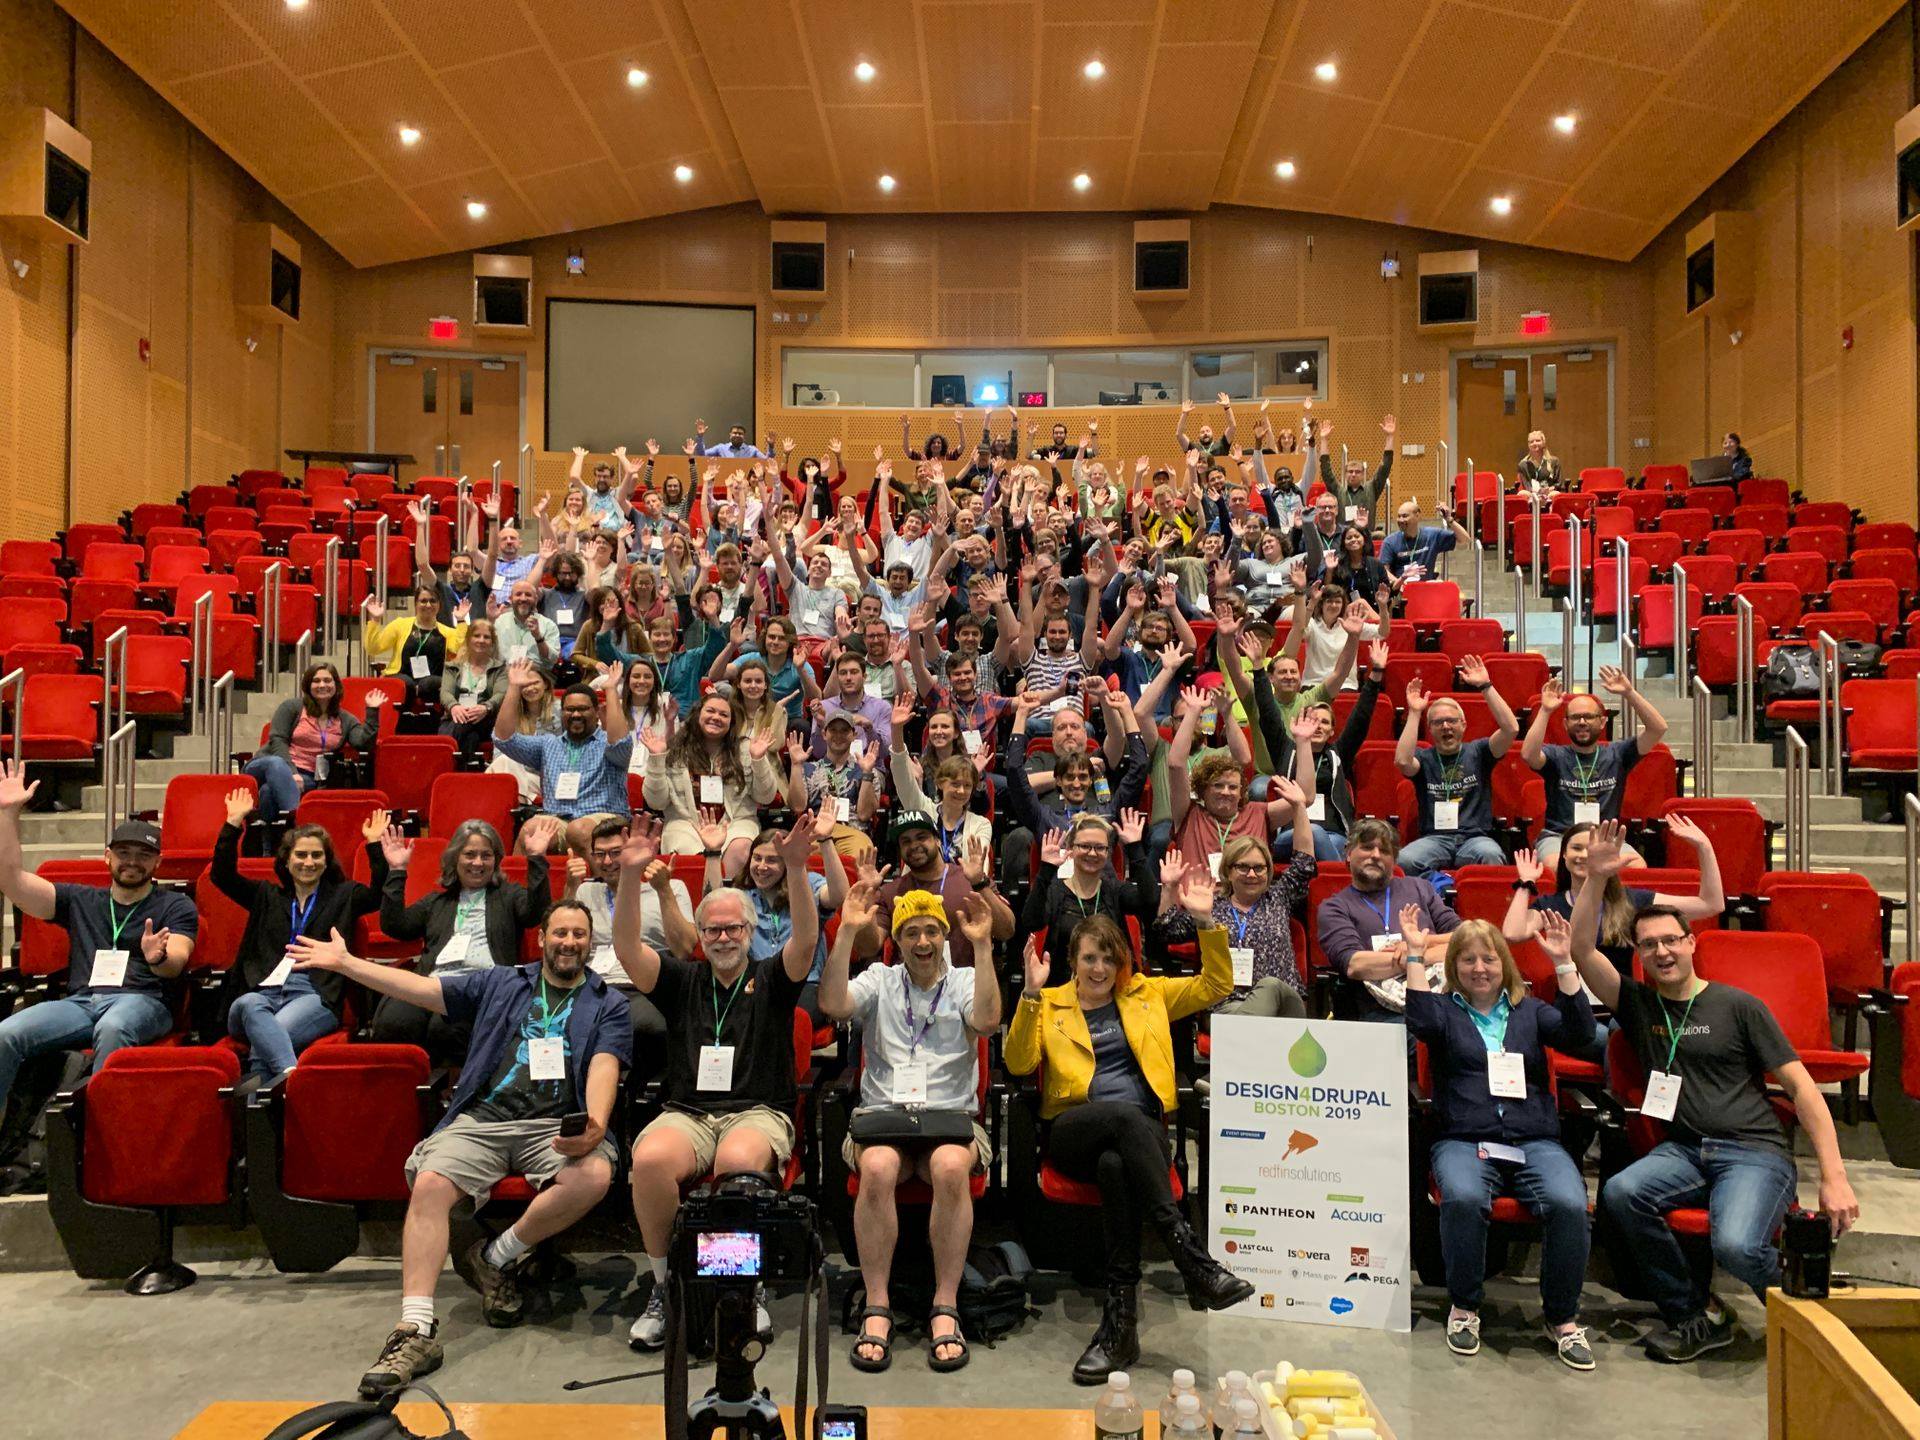 Design 4 Drupal, Boston 2019 attendees in a lecture hall